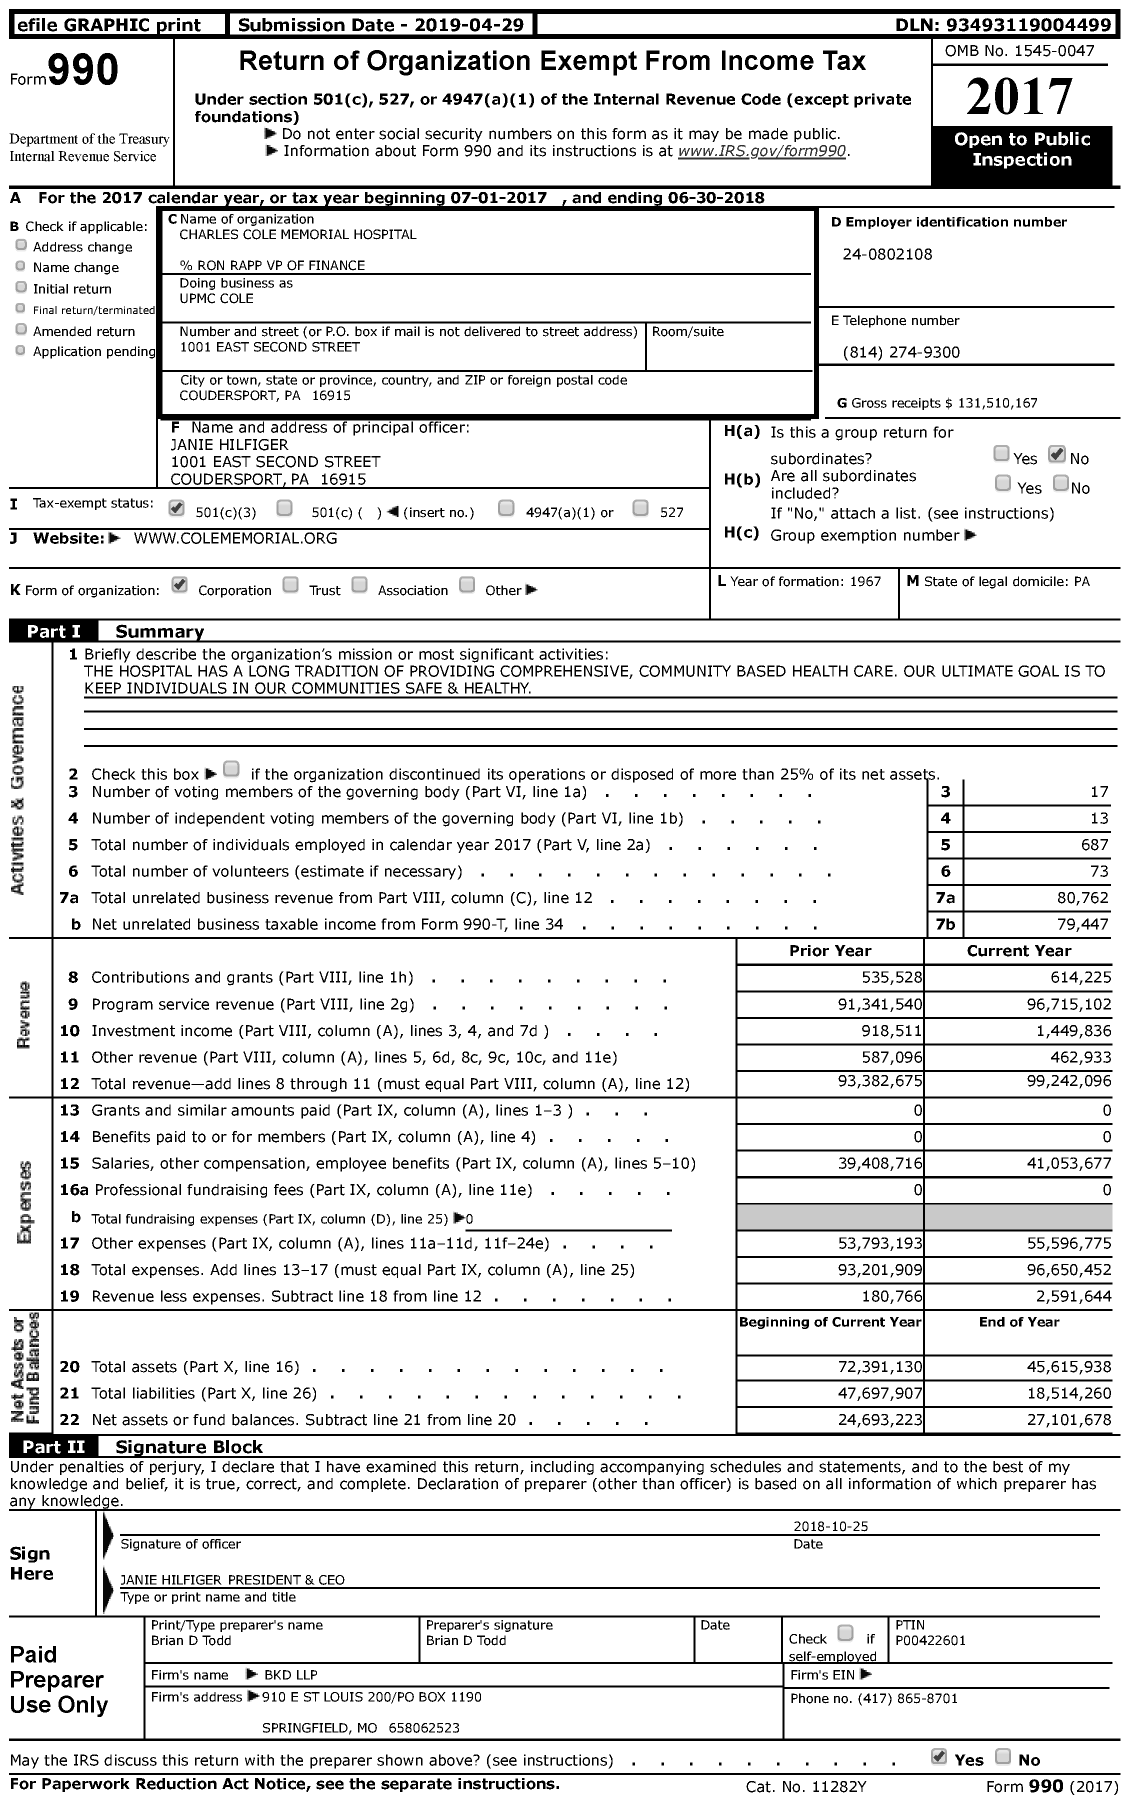 Image of first page of 2017 Form 990 for Upmc Cole